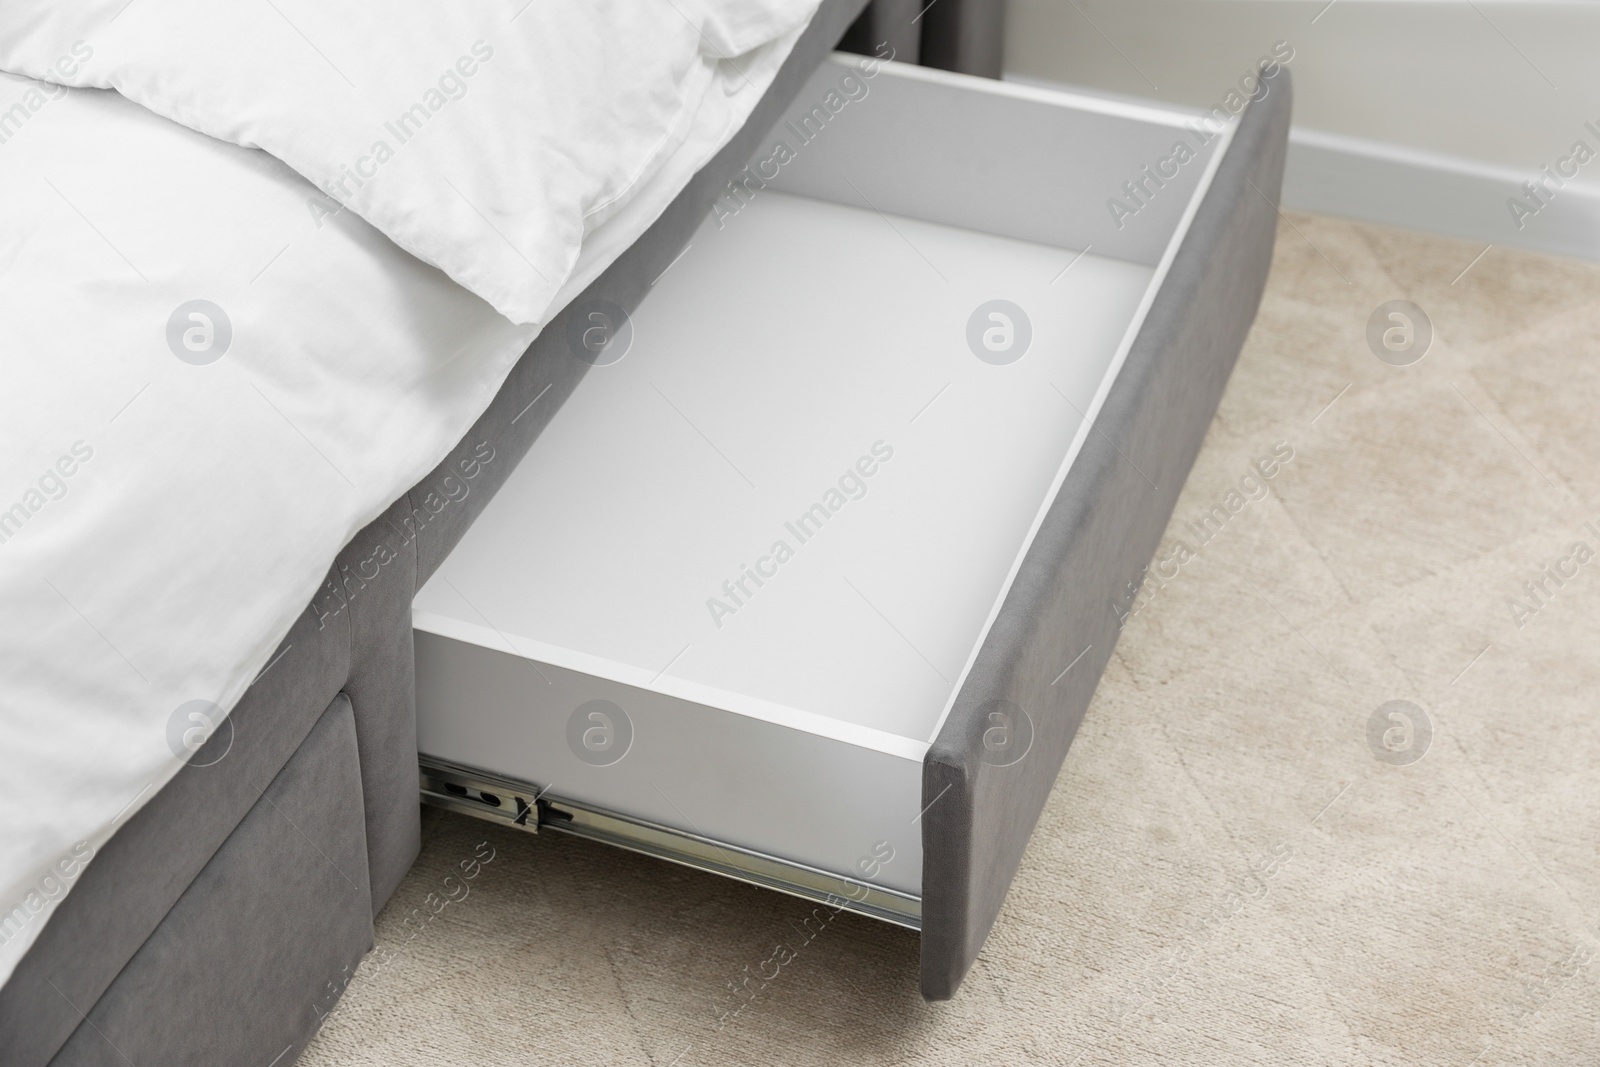 Photo of Storage drawer for bedding under modern bed in room